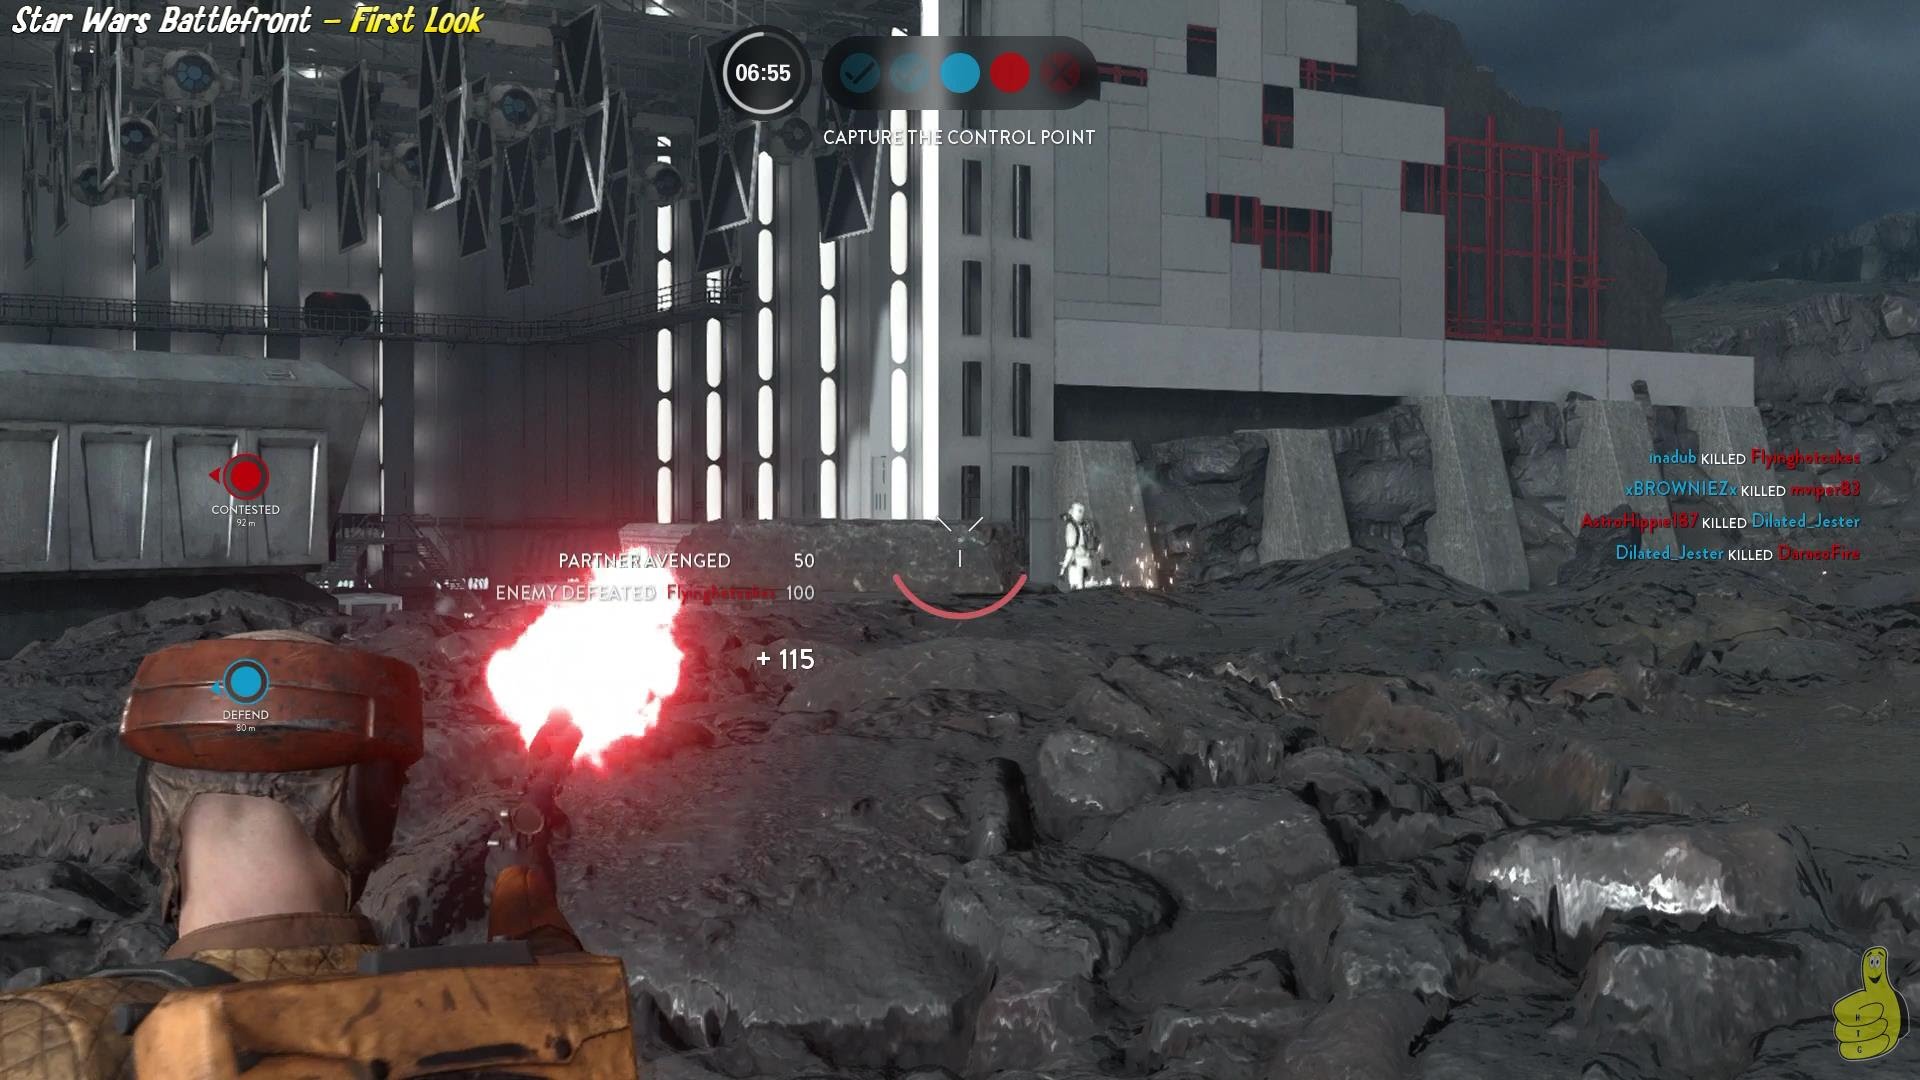 Star Wars Battlefront: First Look 25 Minutes of Gameplay – HTG